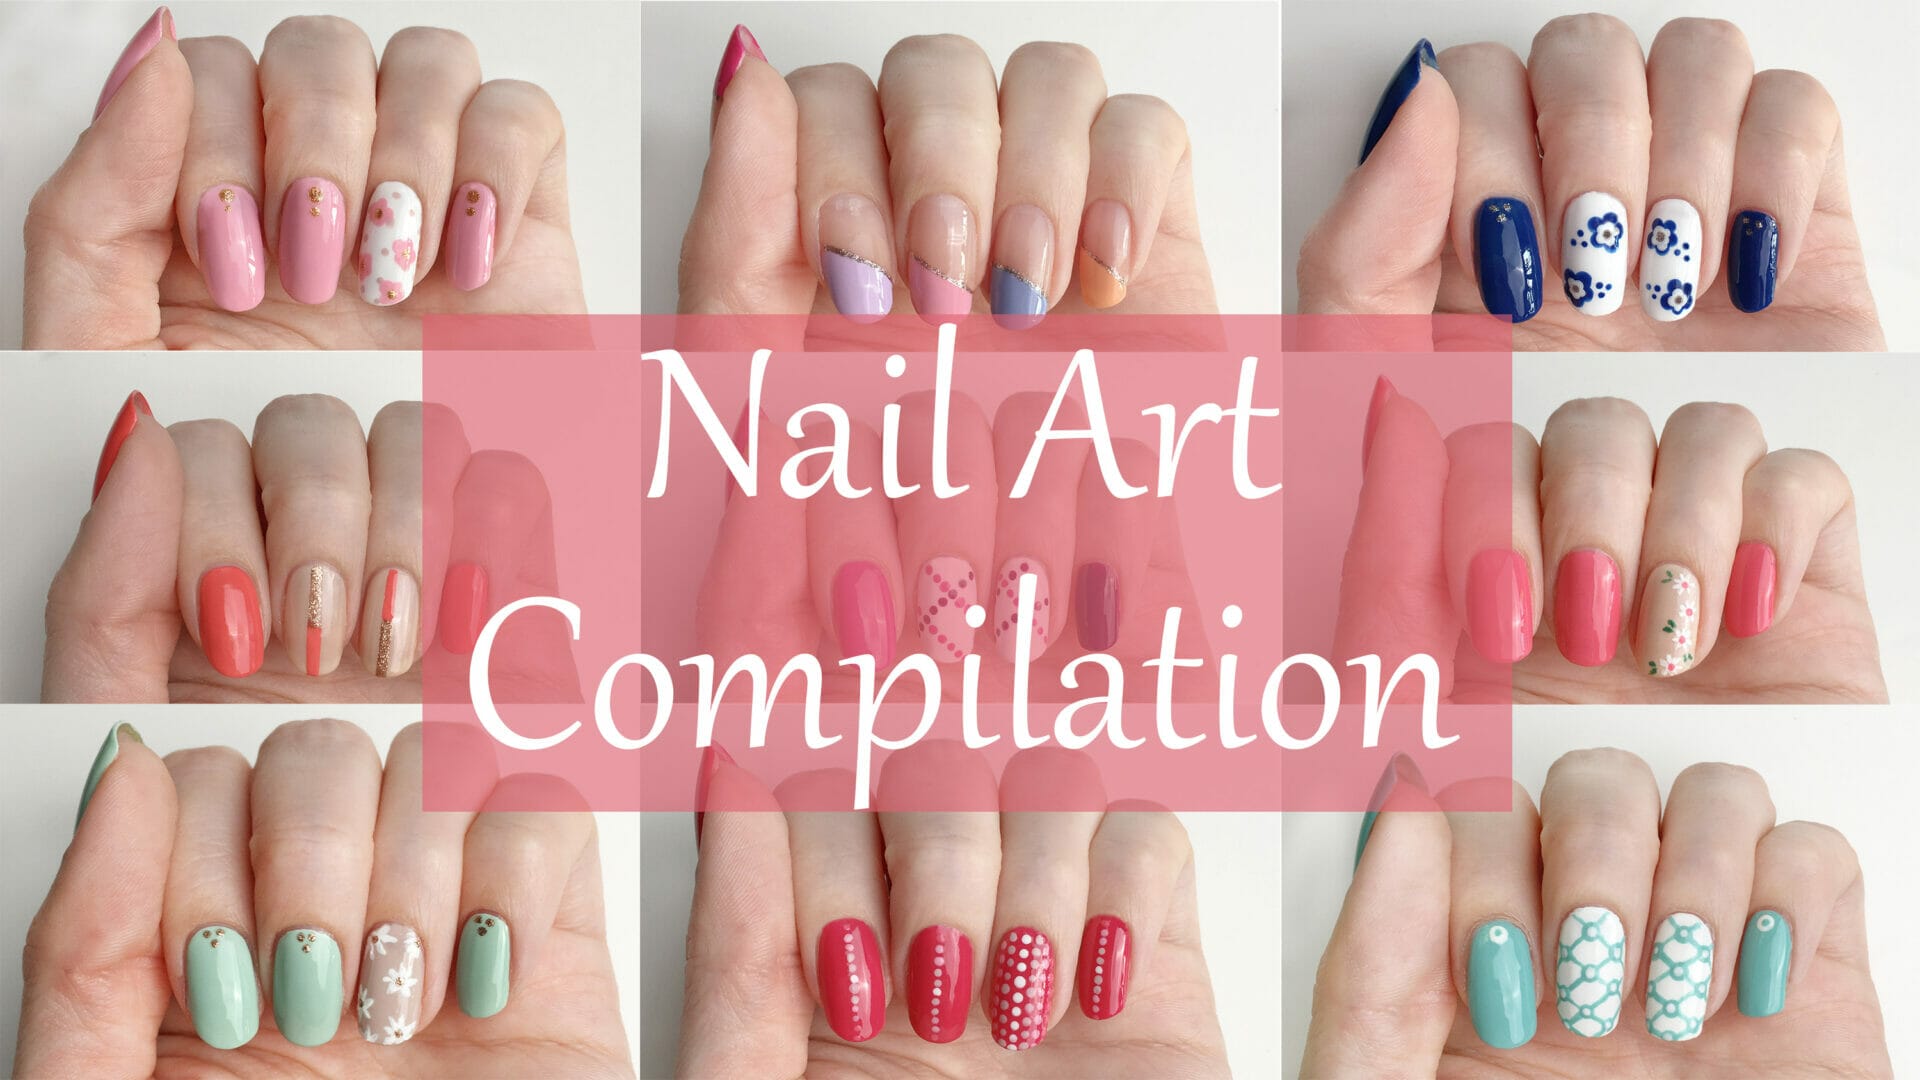 3. "Nail Art Compilation: Best of 2021" - wide 7